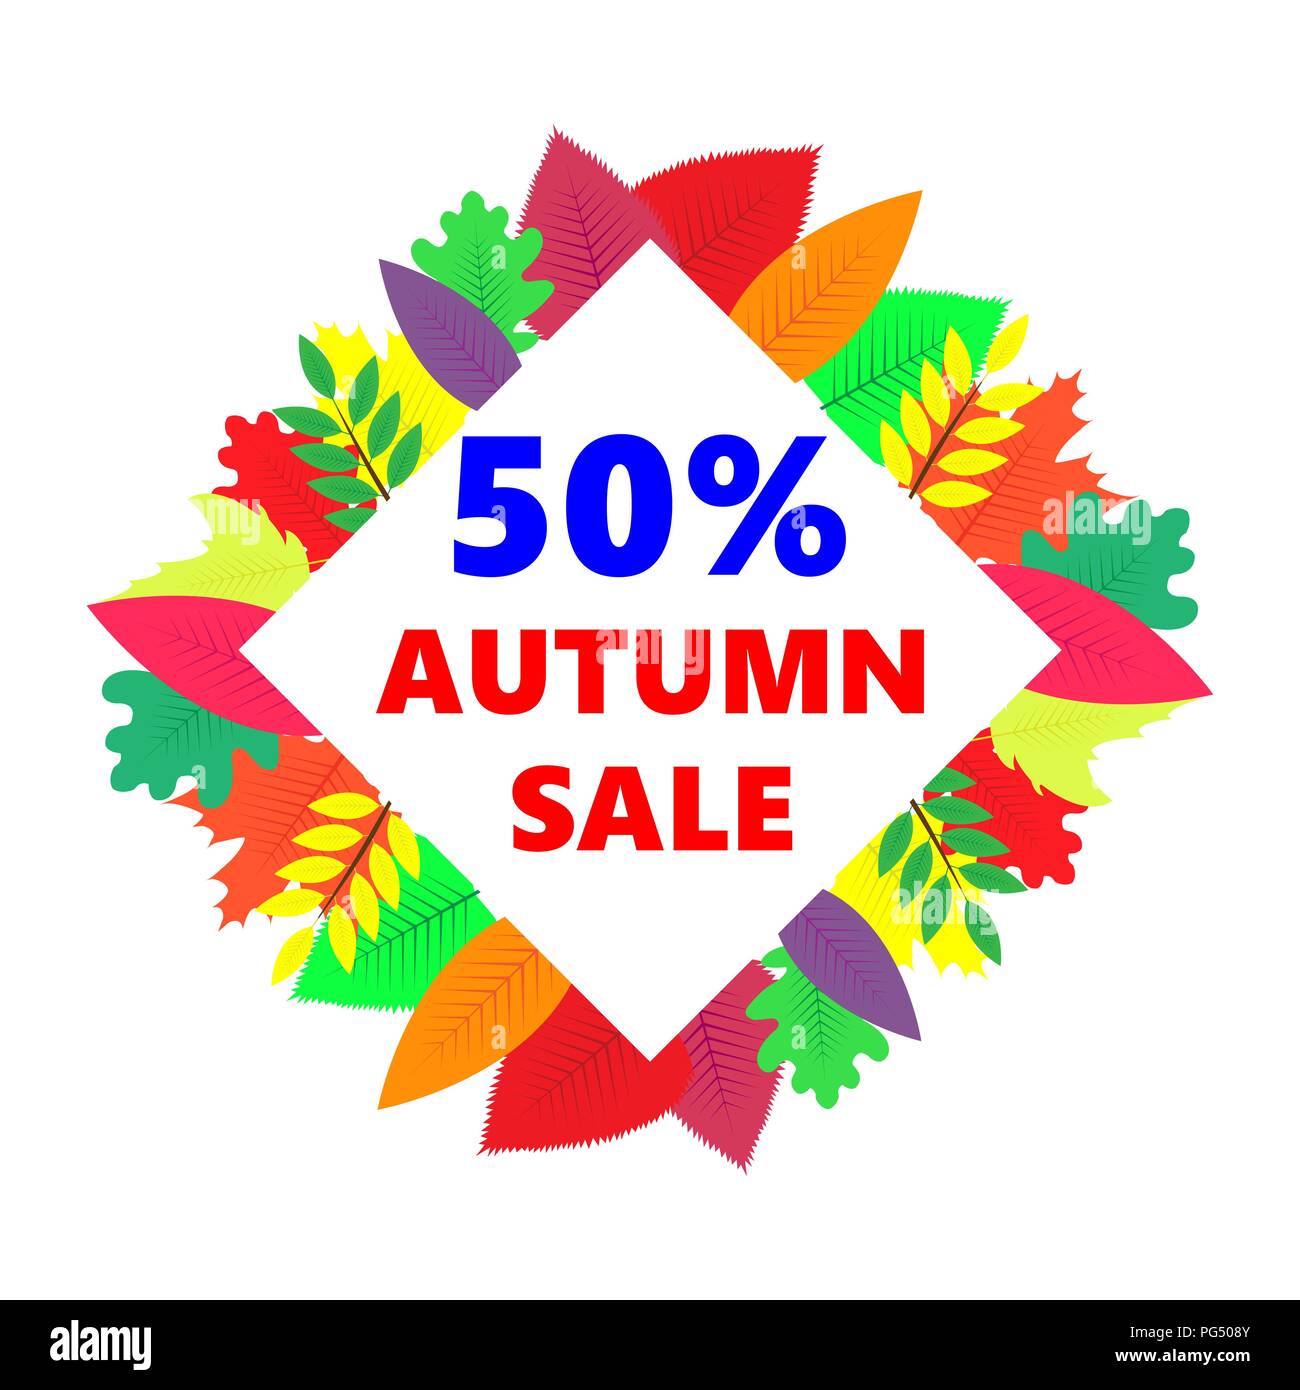 Autumn sale, vector design banner with colored leaves Stock Vector